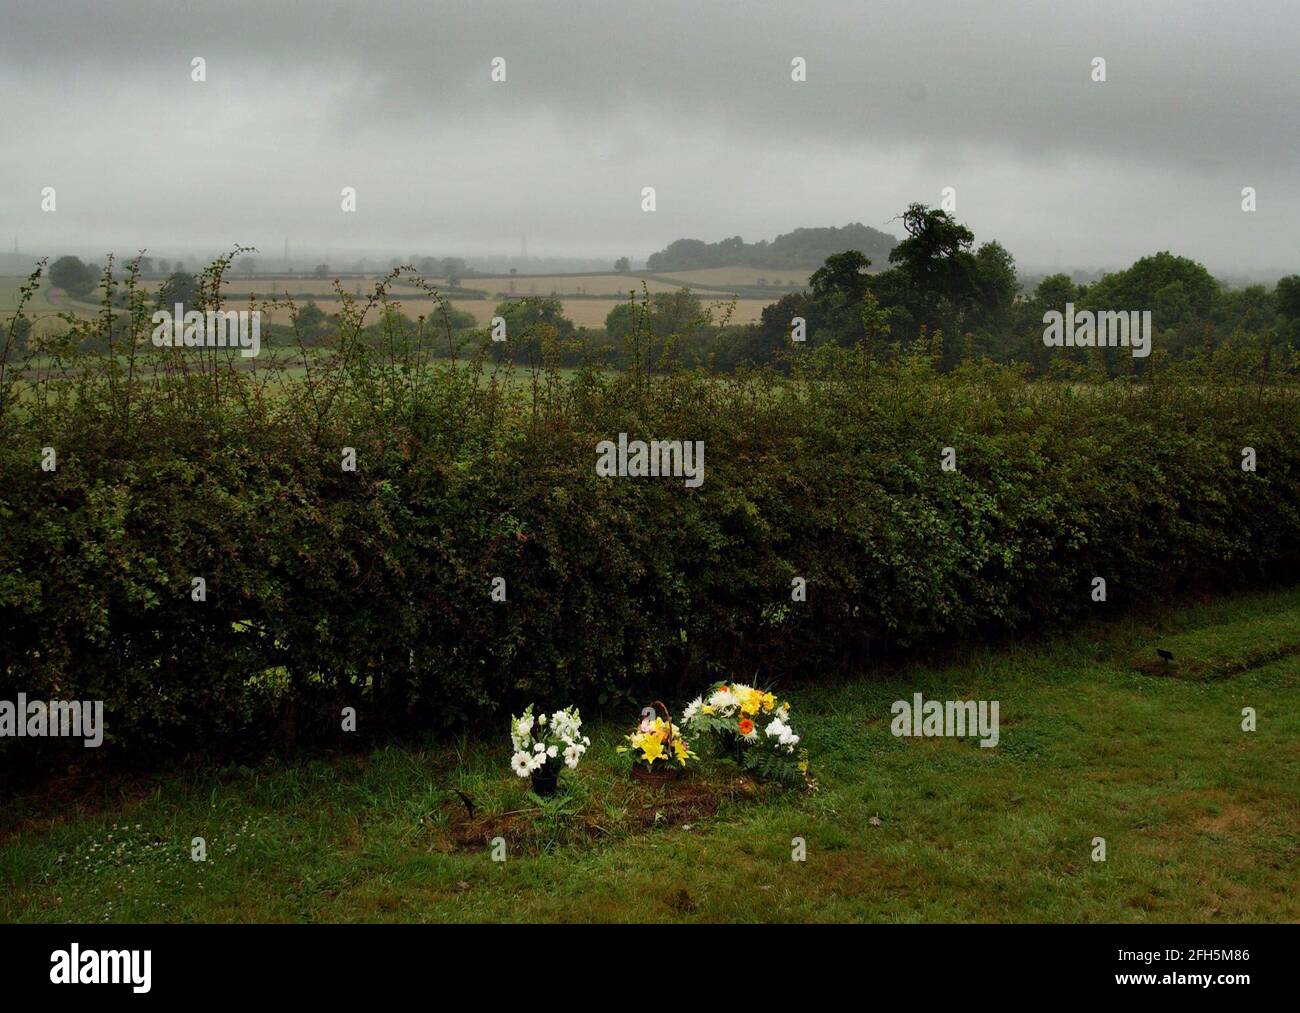 DAWN OVER THE GRAVE OF DR DAVID KELLY AT ST MARY'S CHURCHYARD IN LONGWORTH,OXON.16/7/04 PILSTON Stock Photo